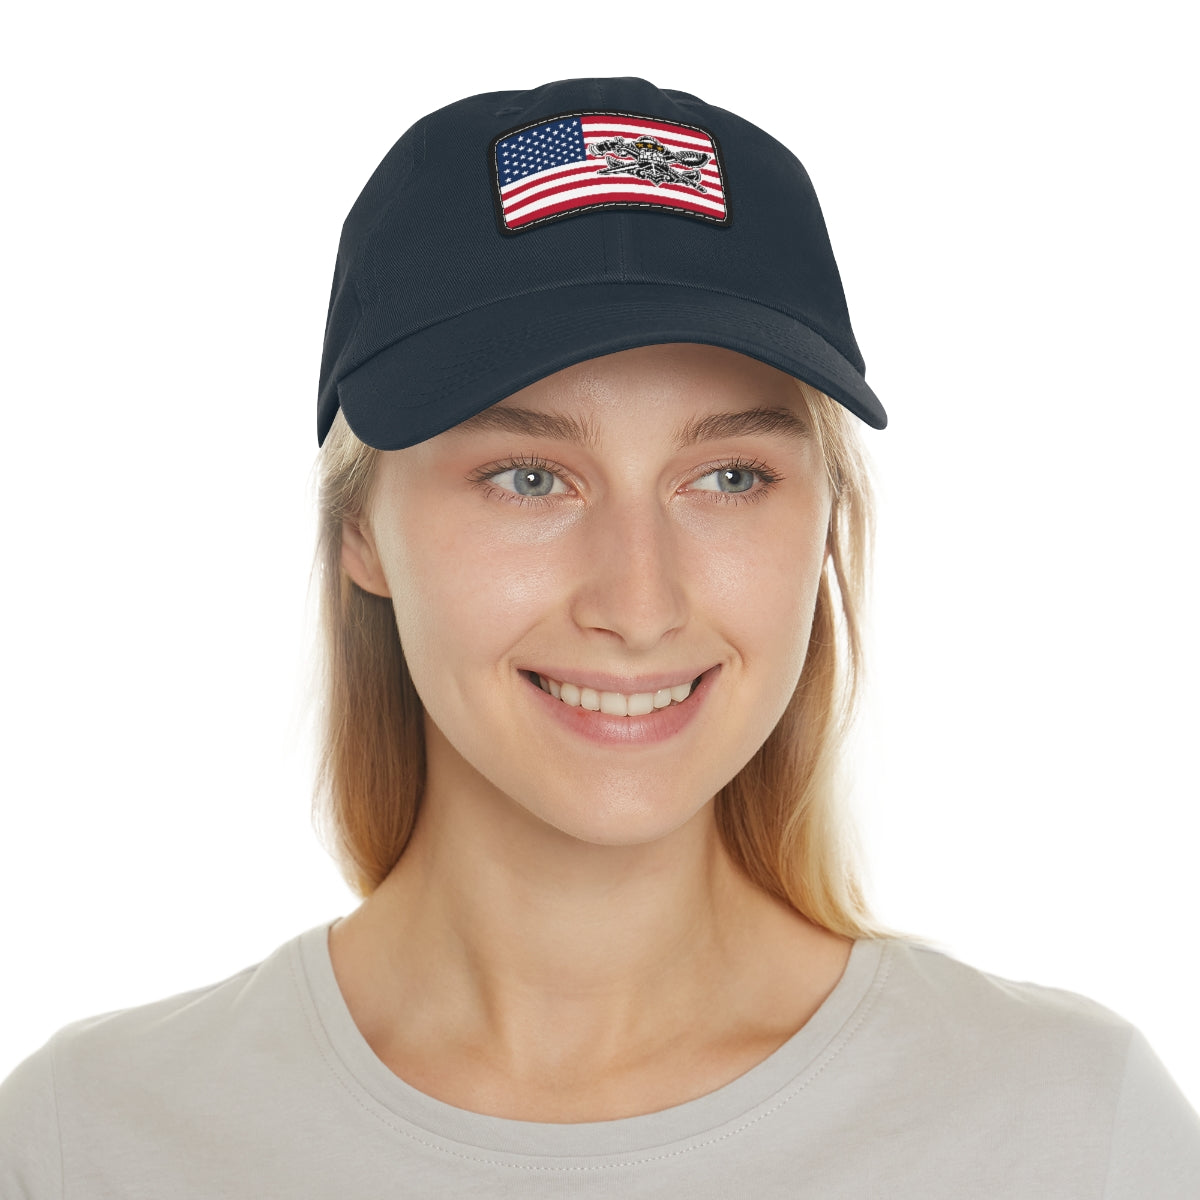 USA with SWCC Pin Hat with Leather Patch